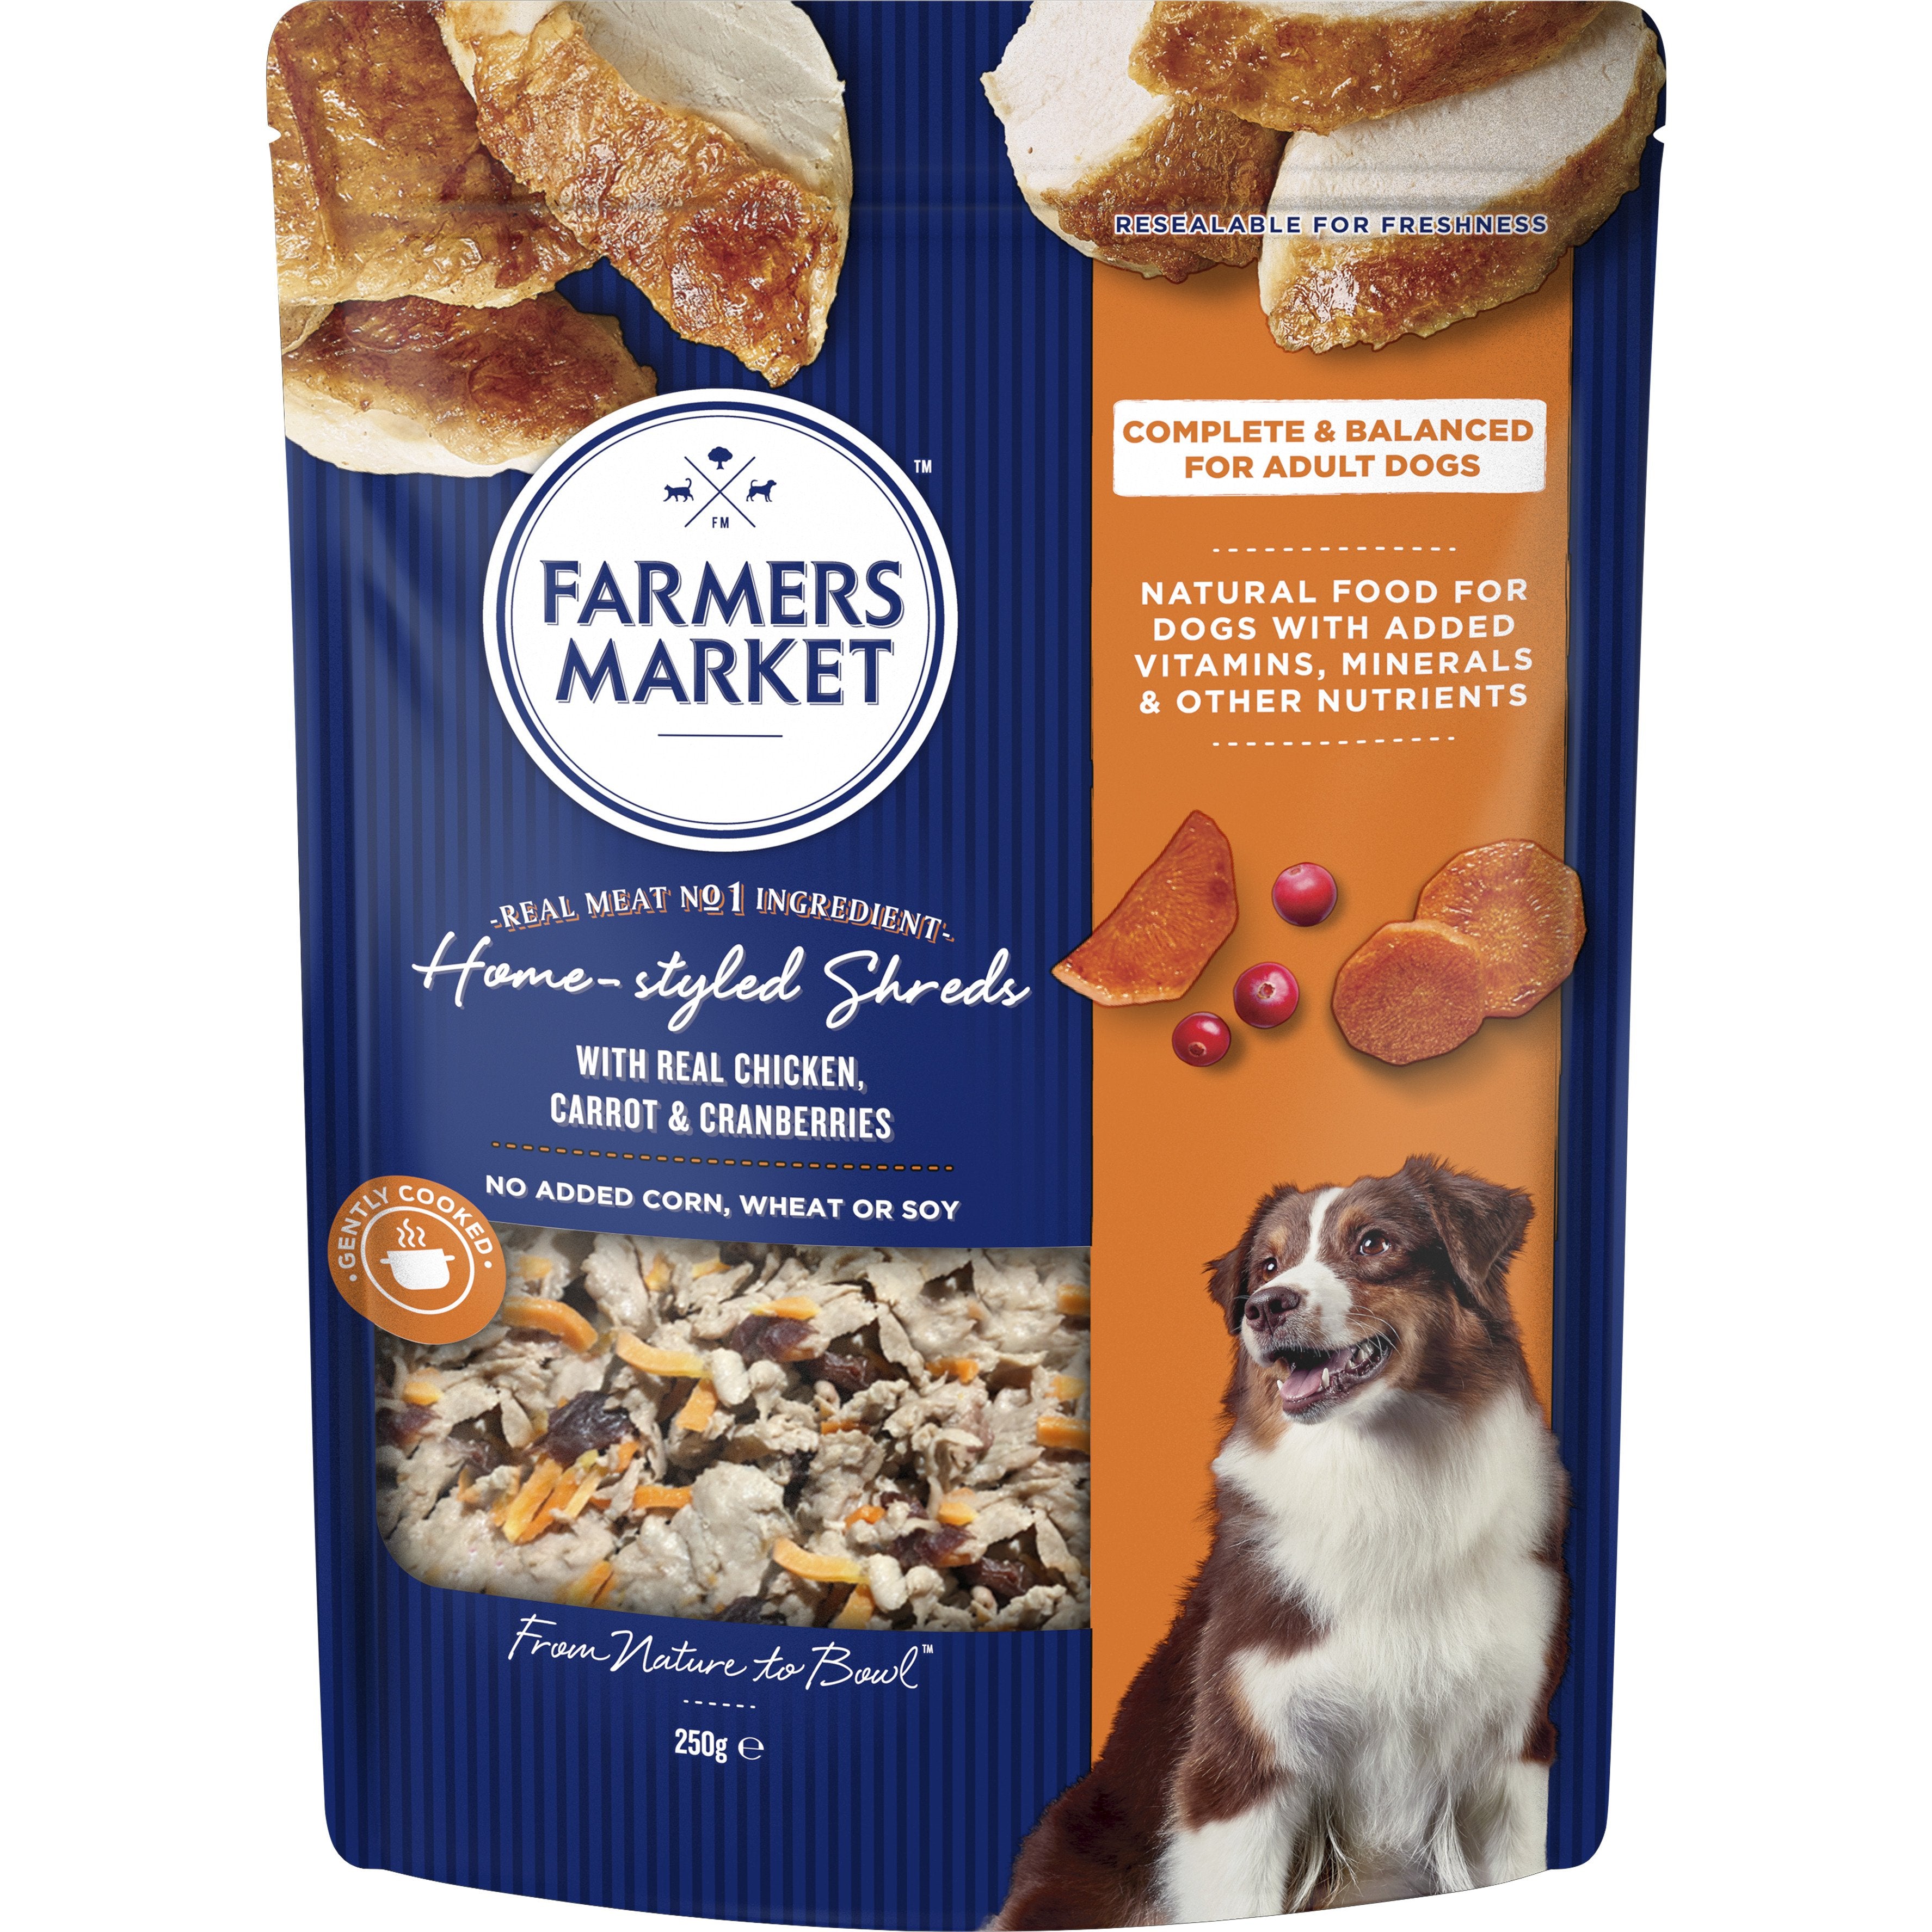 Farmers Market Home-Styled Shreds with Chicken Carrots and Cranberries Chilled Dog Food